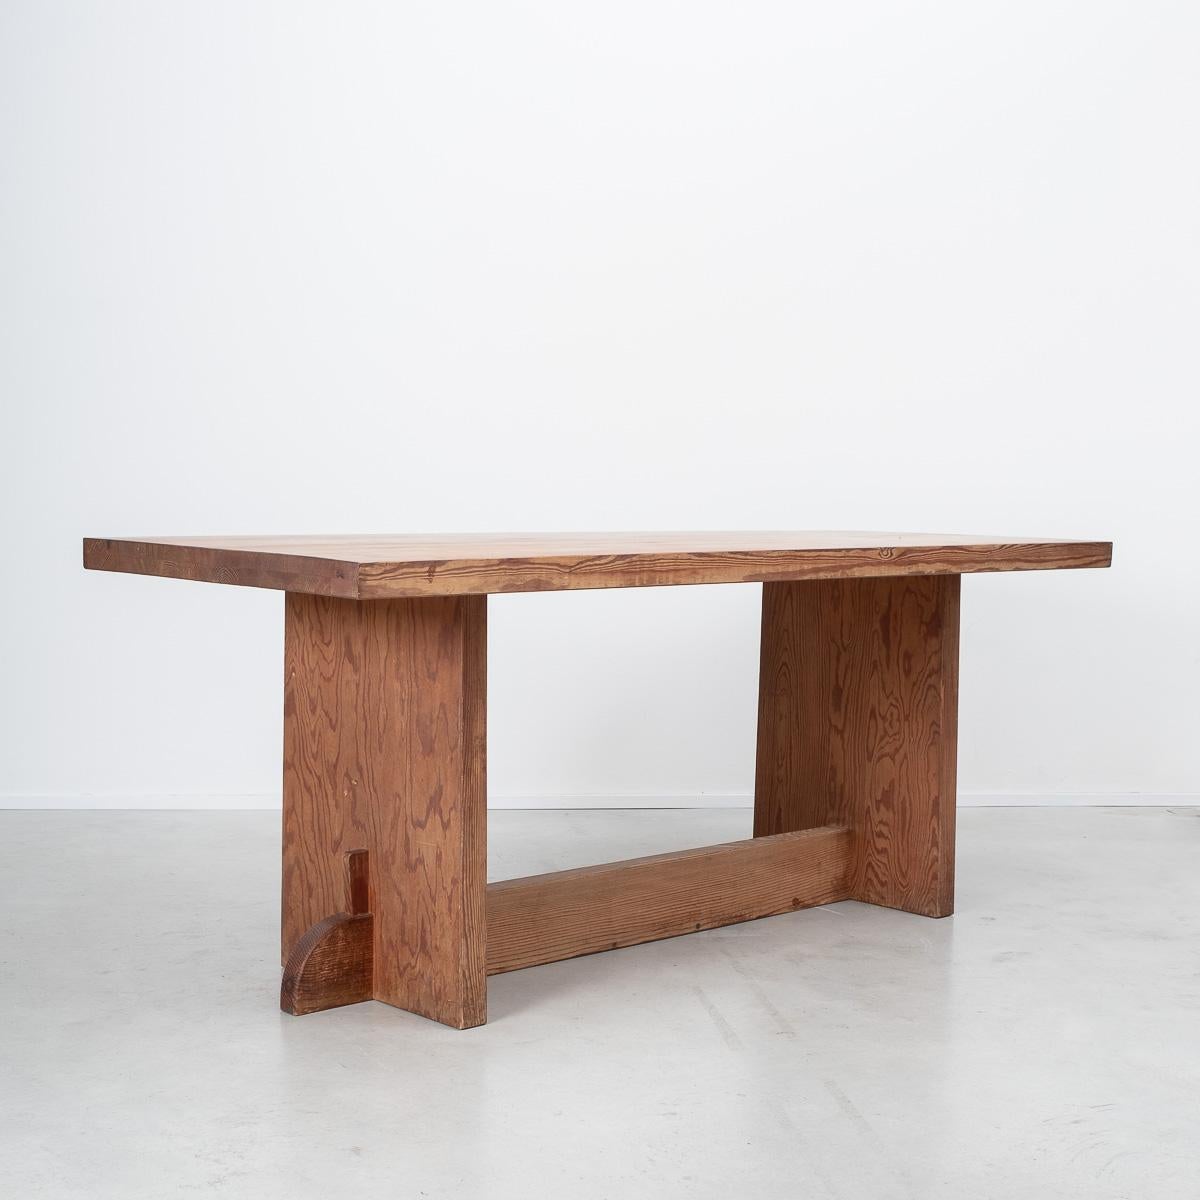 Nordiska Kompaniet, Sweden, 1932

A Swedish Pine Lovö dining table designed by Axel Einar Hjorth for Nordiska Kompaniet in the 1930s. Hjorth was major contributor to the burgeoning Swedish design culture that was recognized internationally in the